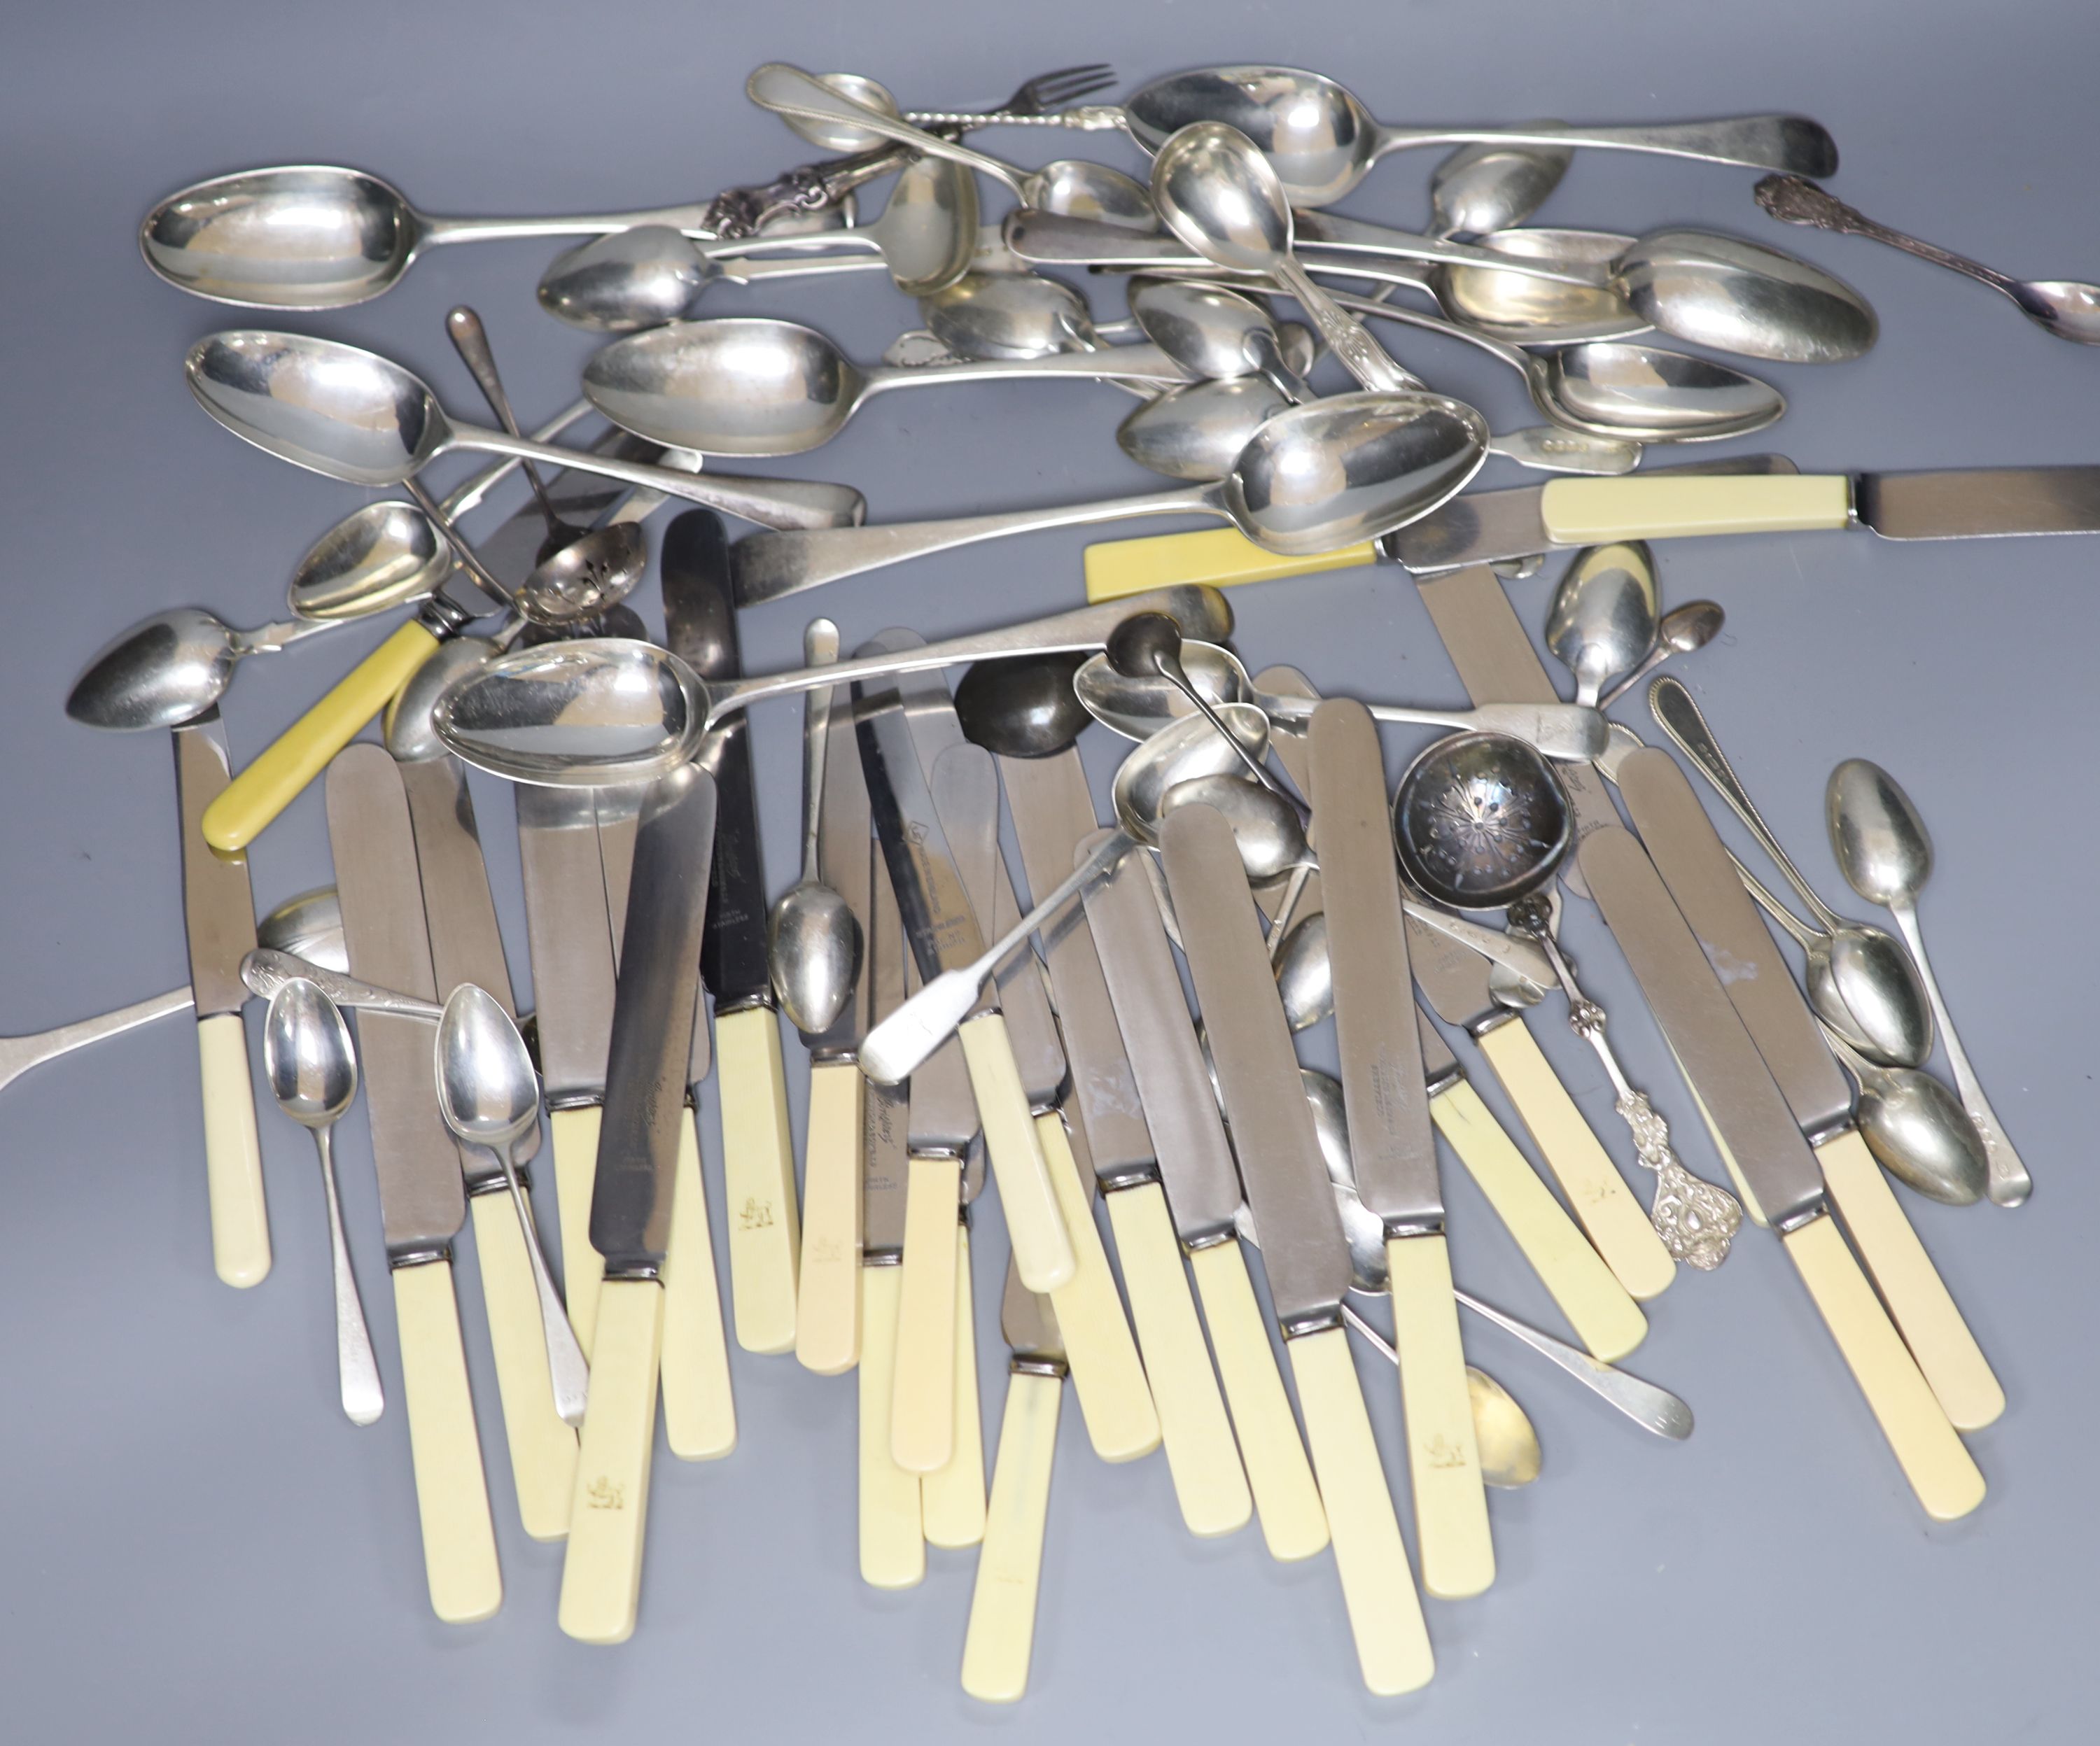 Eleven Victorian silver fiddle pattern teaspoons, a quantity of minor silver flatware, ten assorted 18th/19th century silver tablespoons, a small group of plated flatware and a group of assorted ivorine handled table and